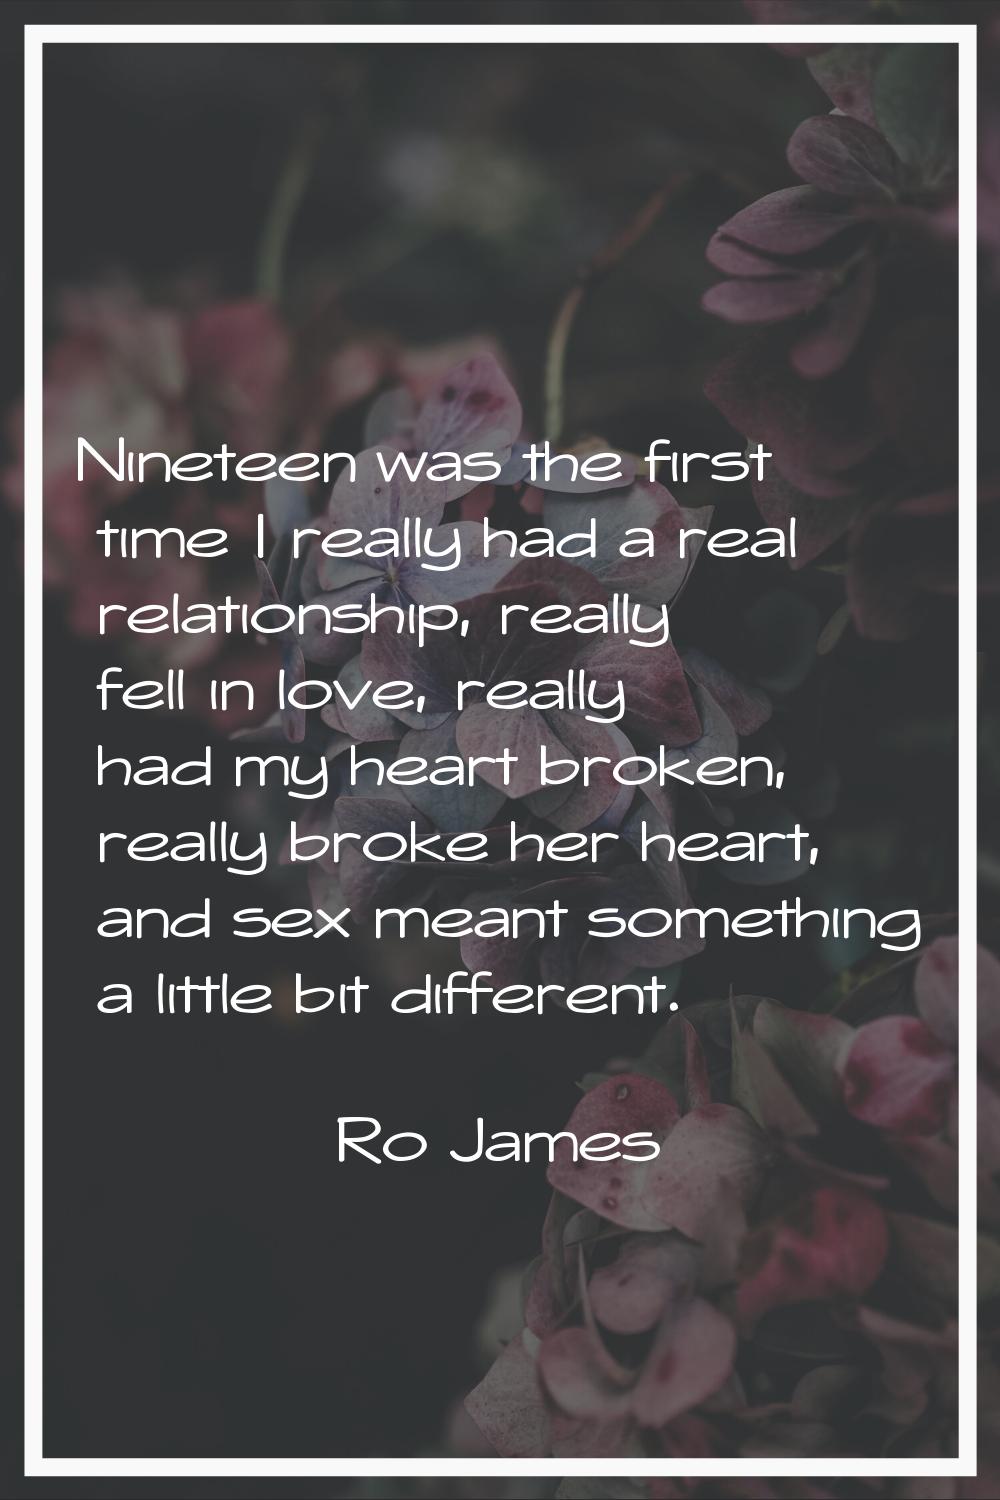 Nineteen was the first time I really had a real relationship, really fell in love, really had my he